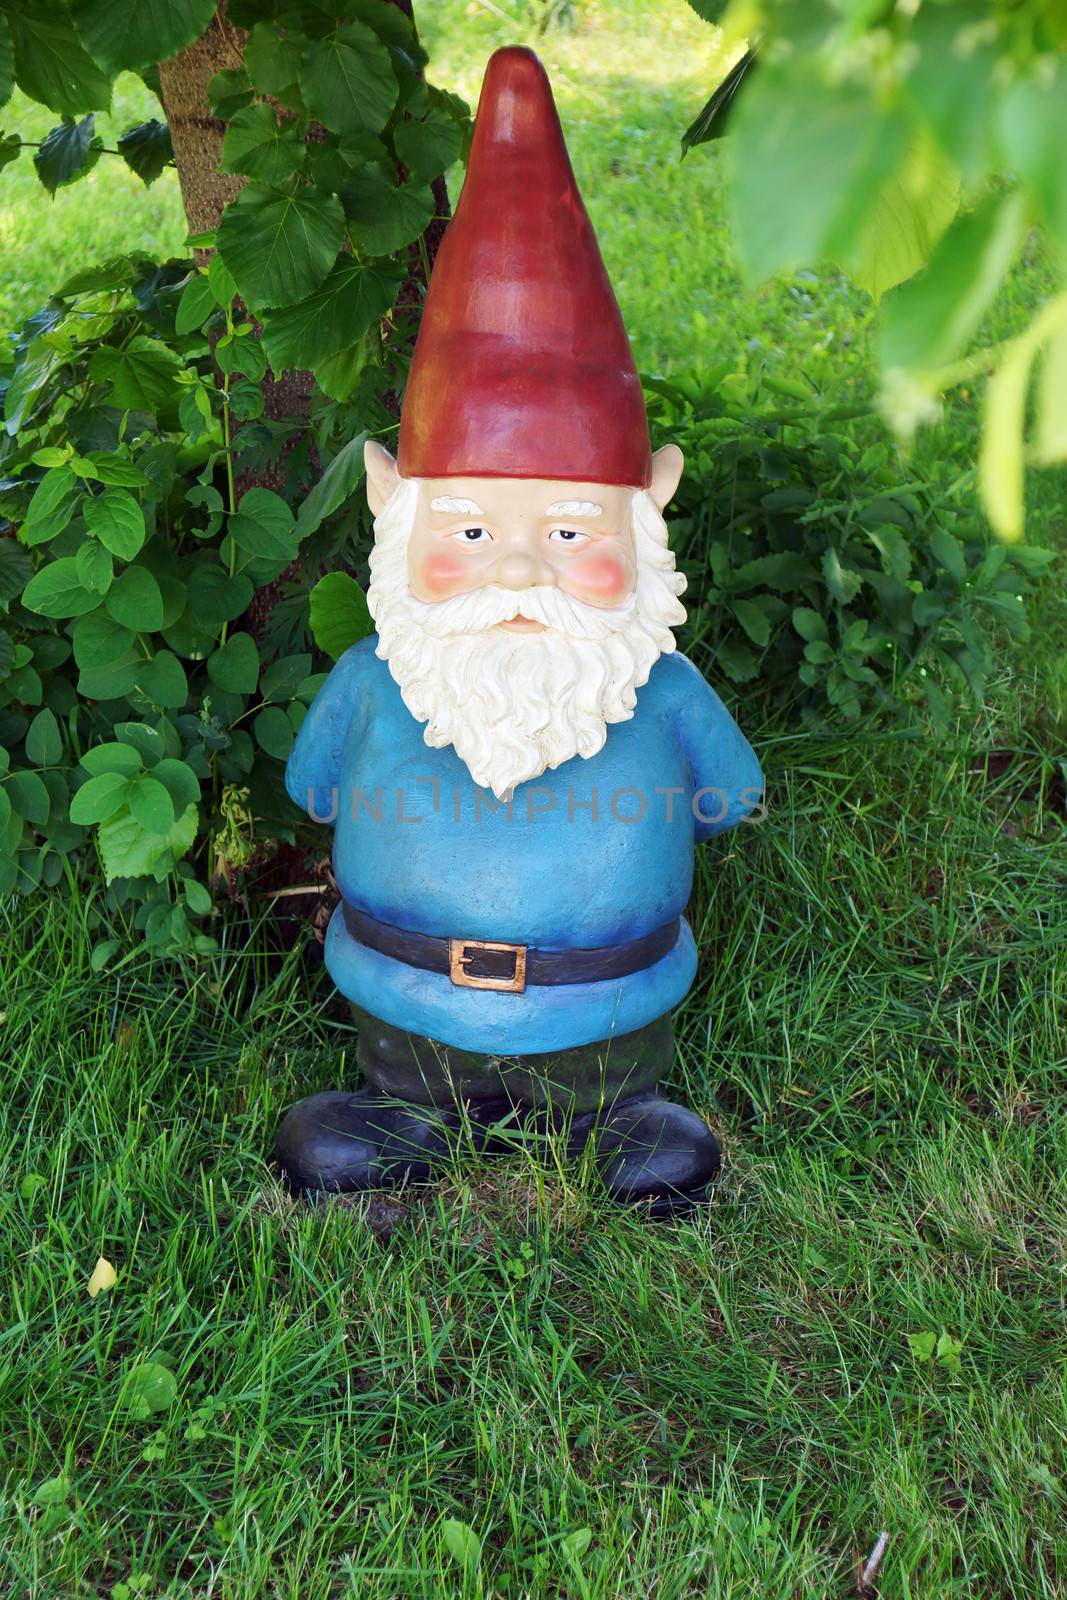 Garden gnome looking at camera by Mirage3